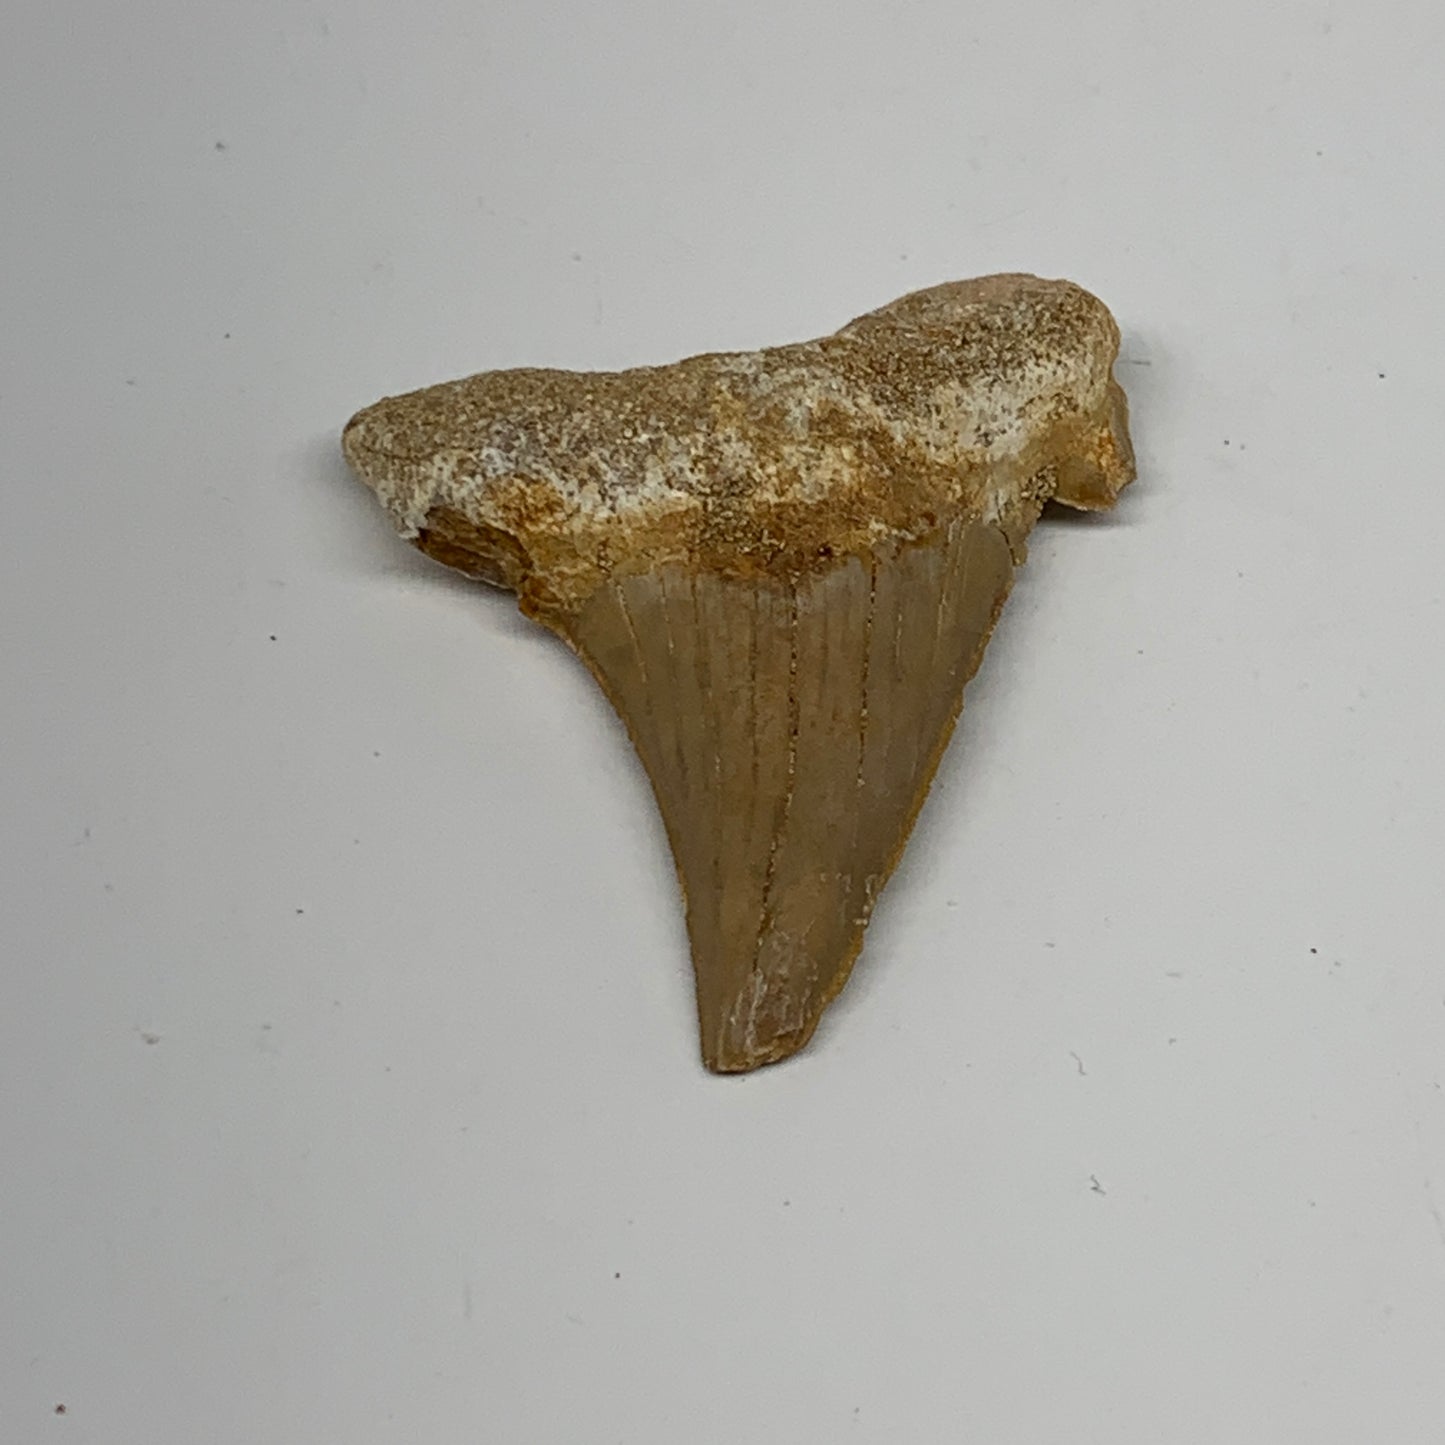 14.4g, 1.8"X 1.6"x 0.4" Natural Fossils Fish Shark Tooth @Morocco, B12647